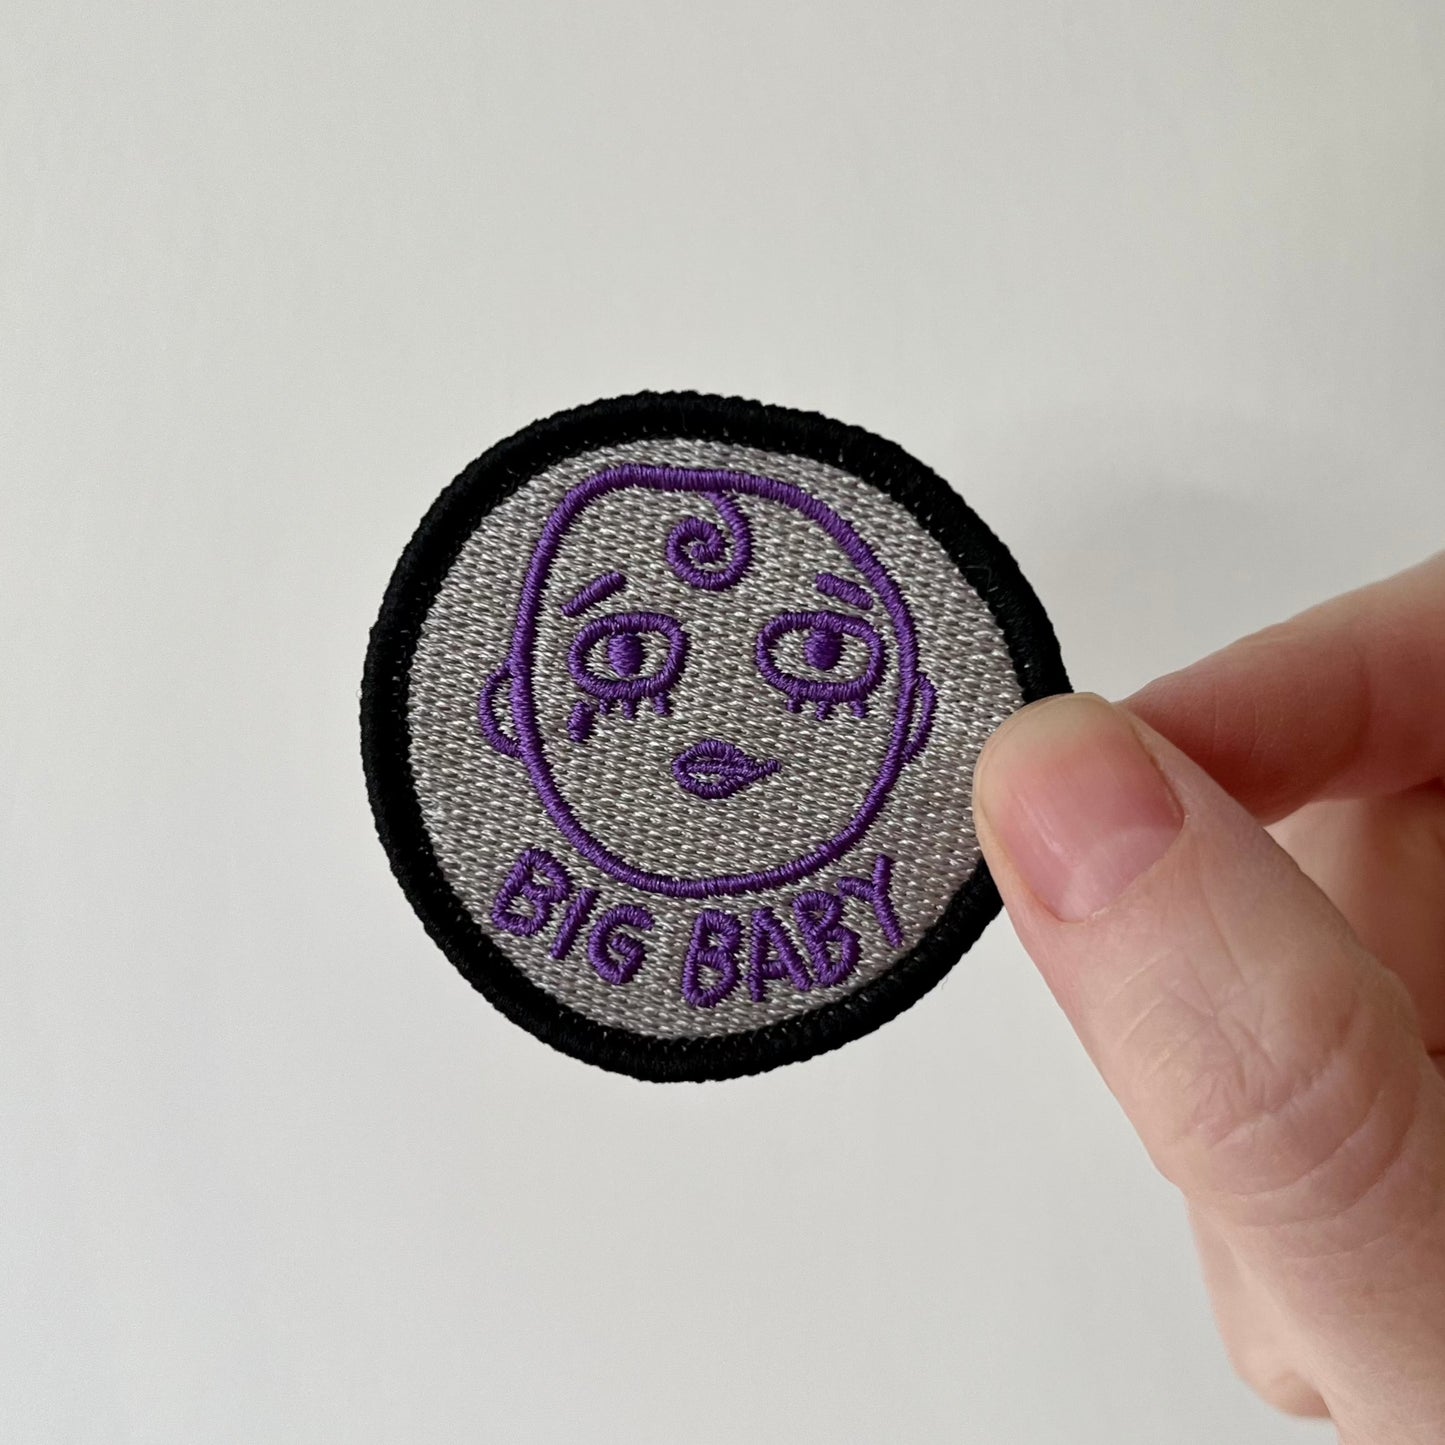 Big Baby 2" Embroidered Patch